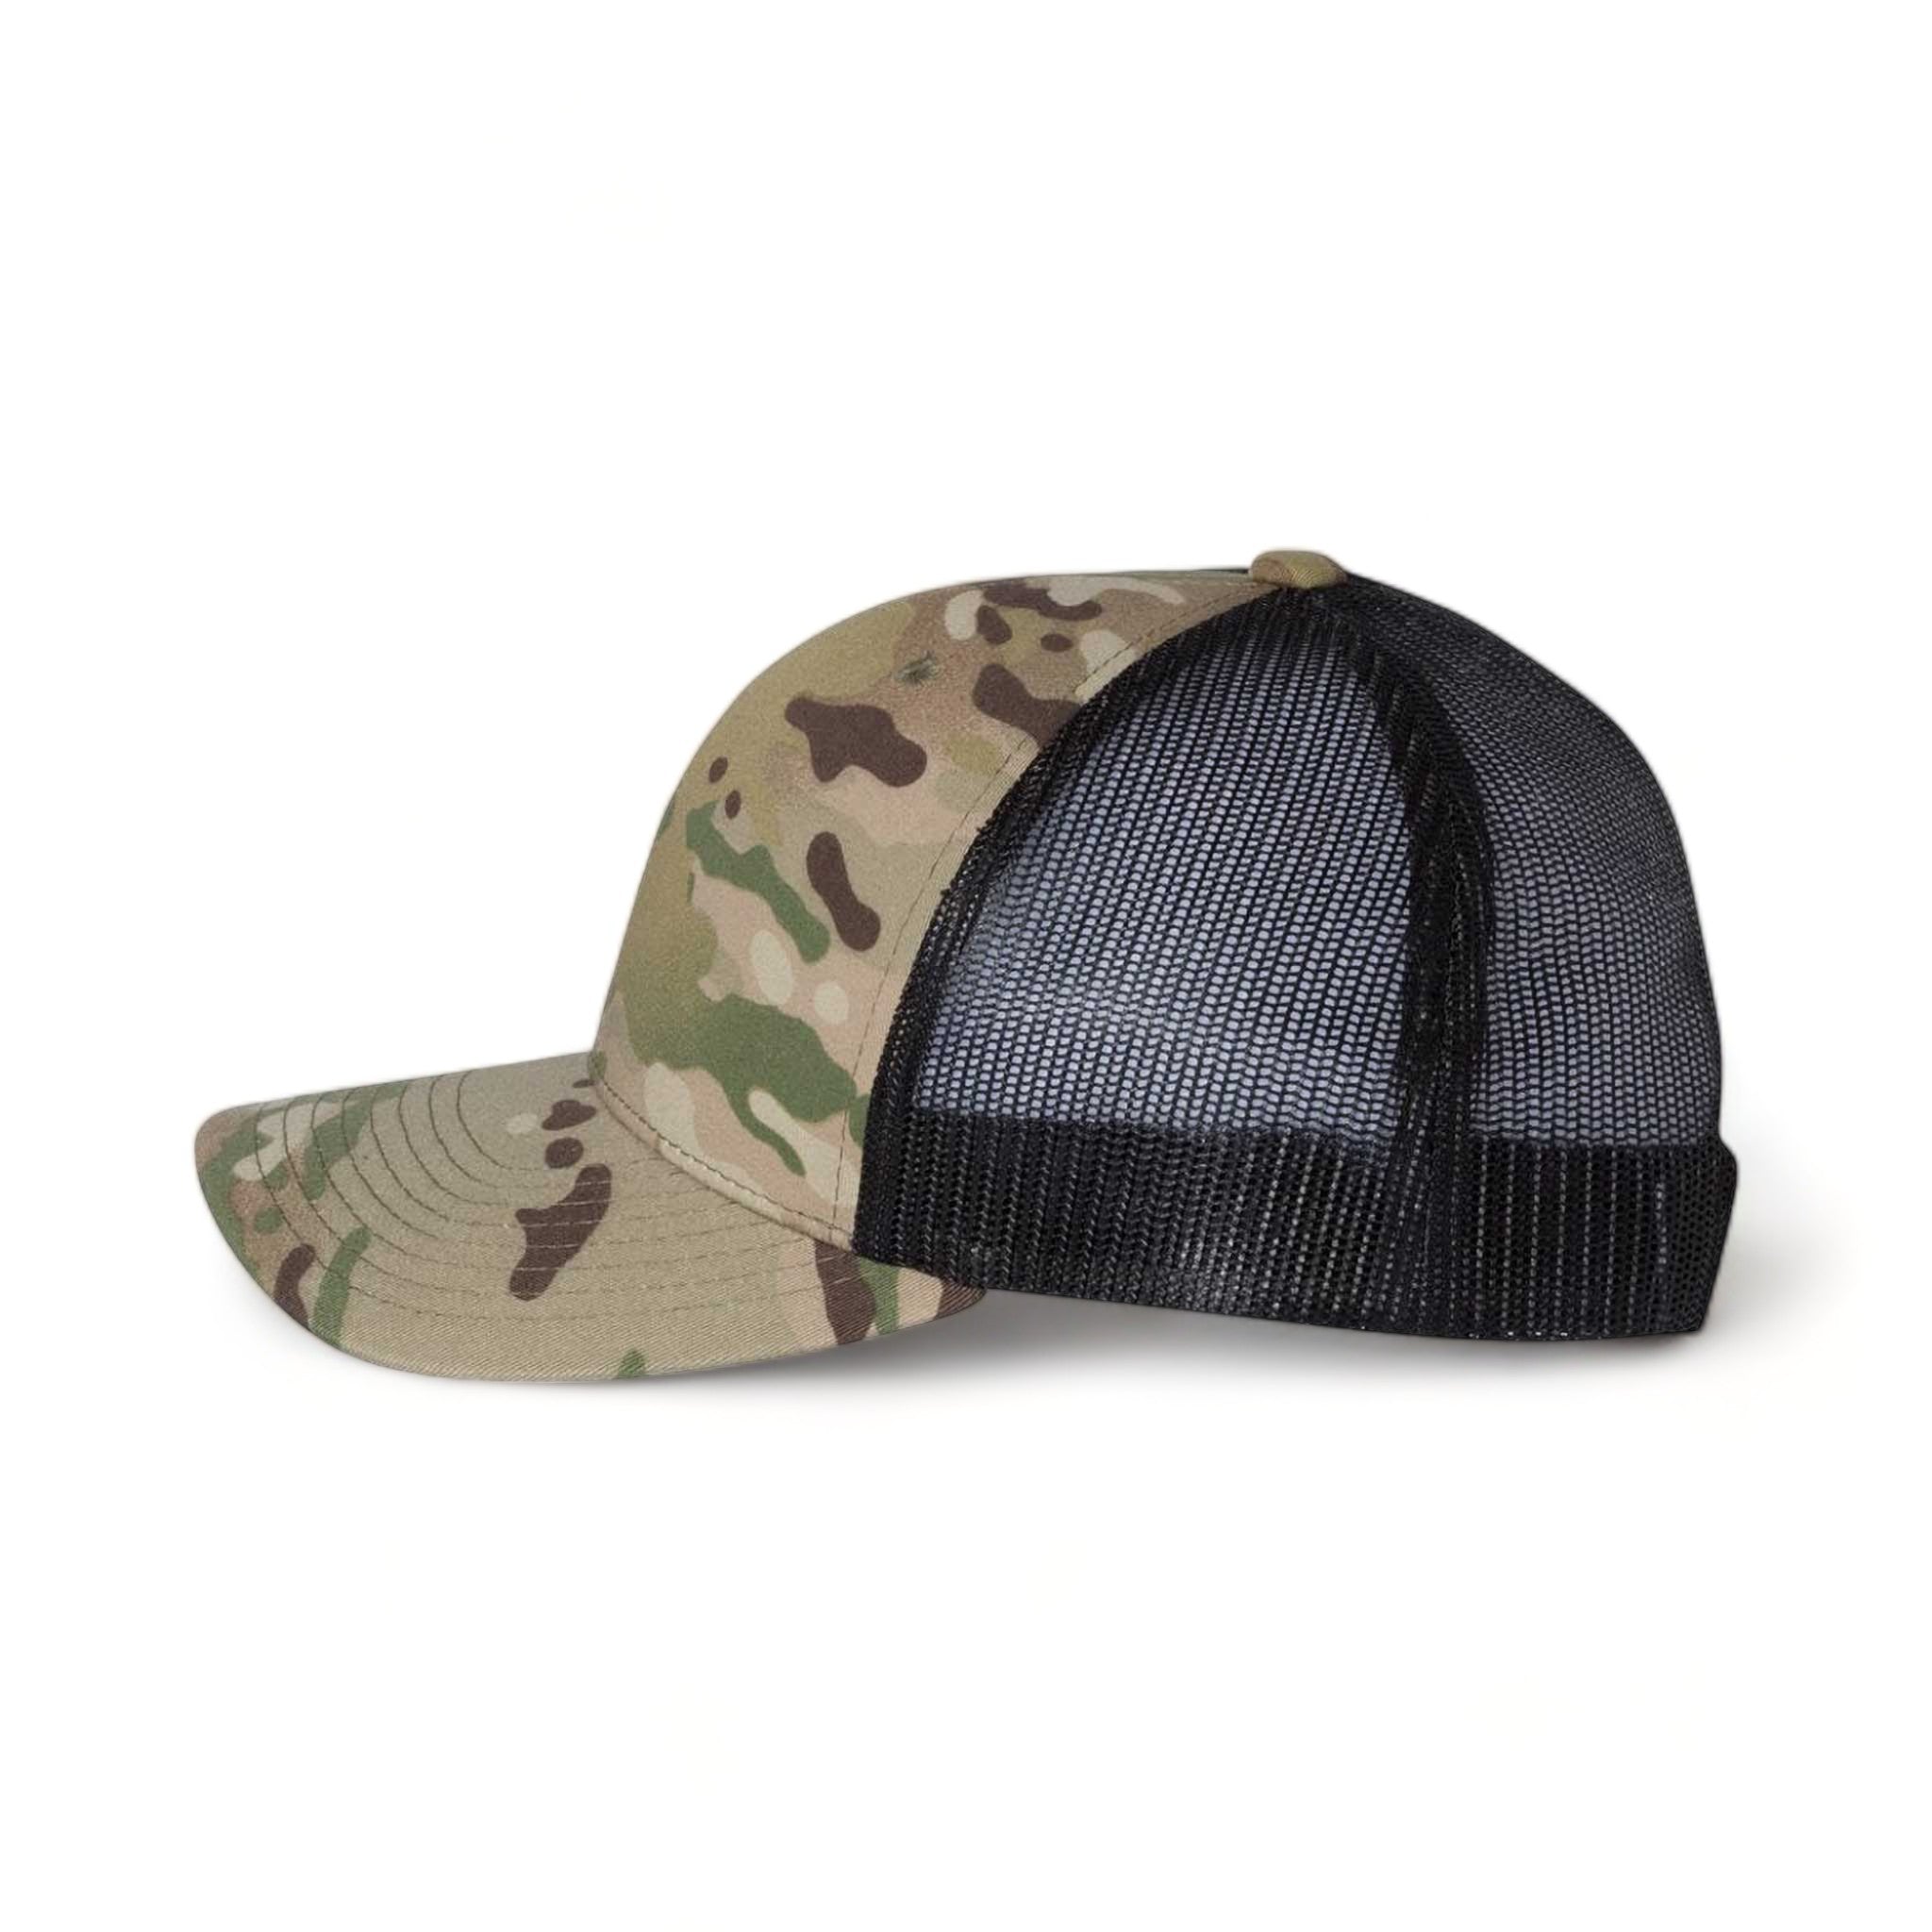 Side view of YP Classics 6606 custom hat in multicam green and black